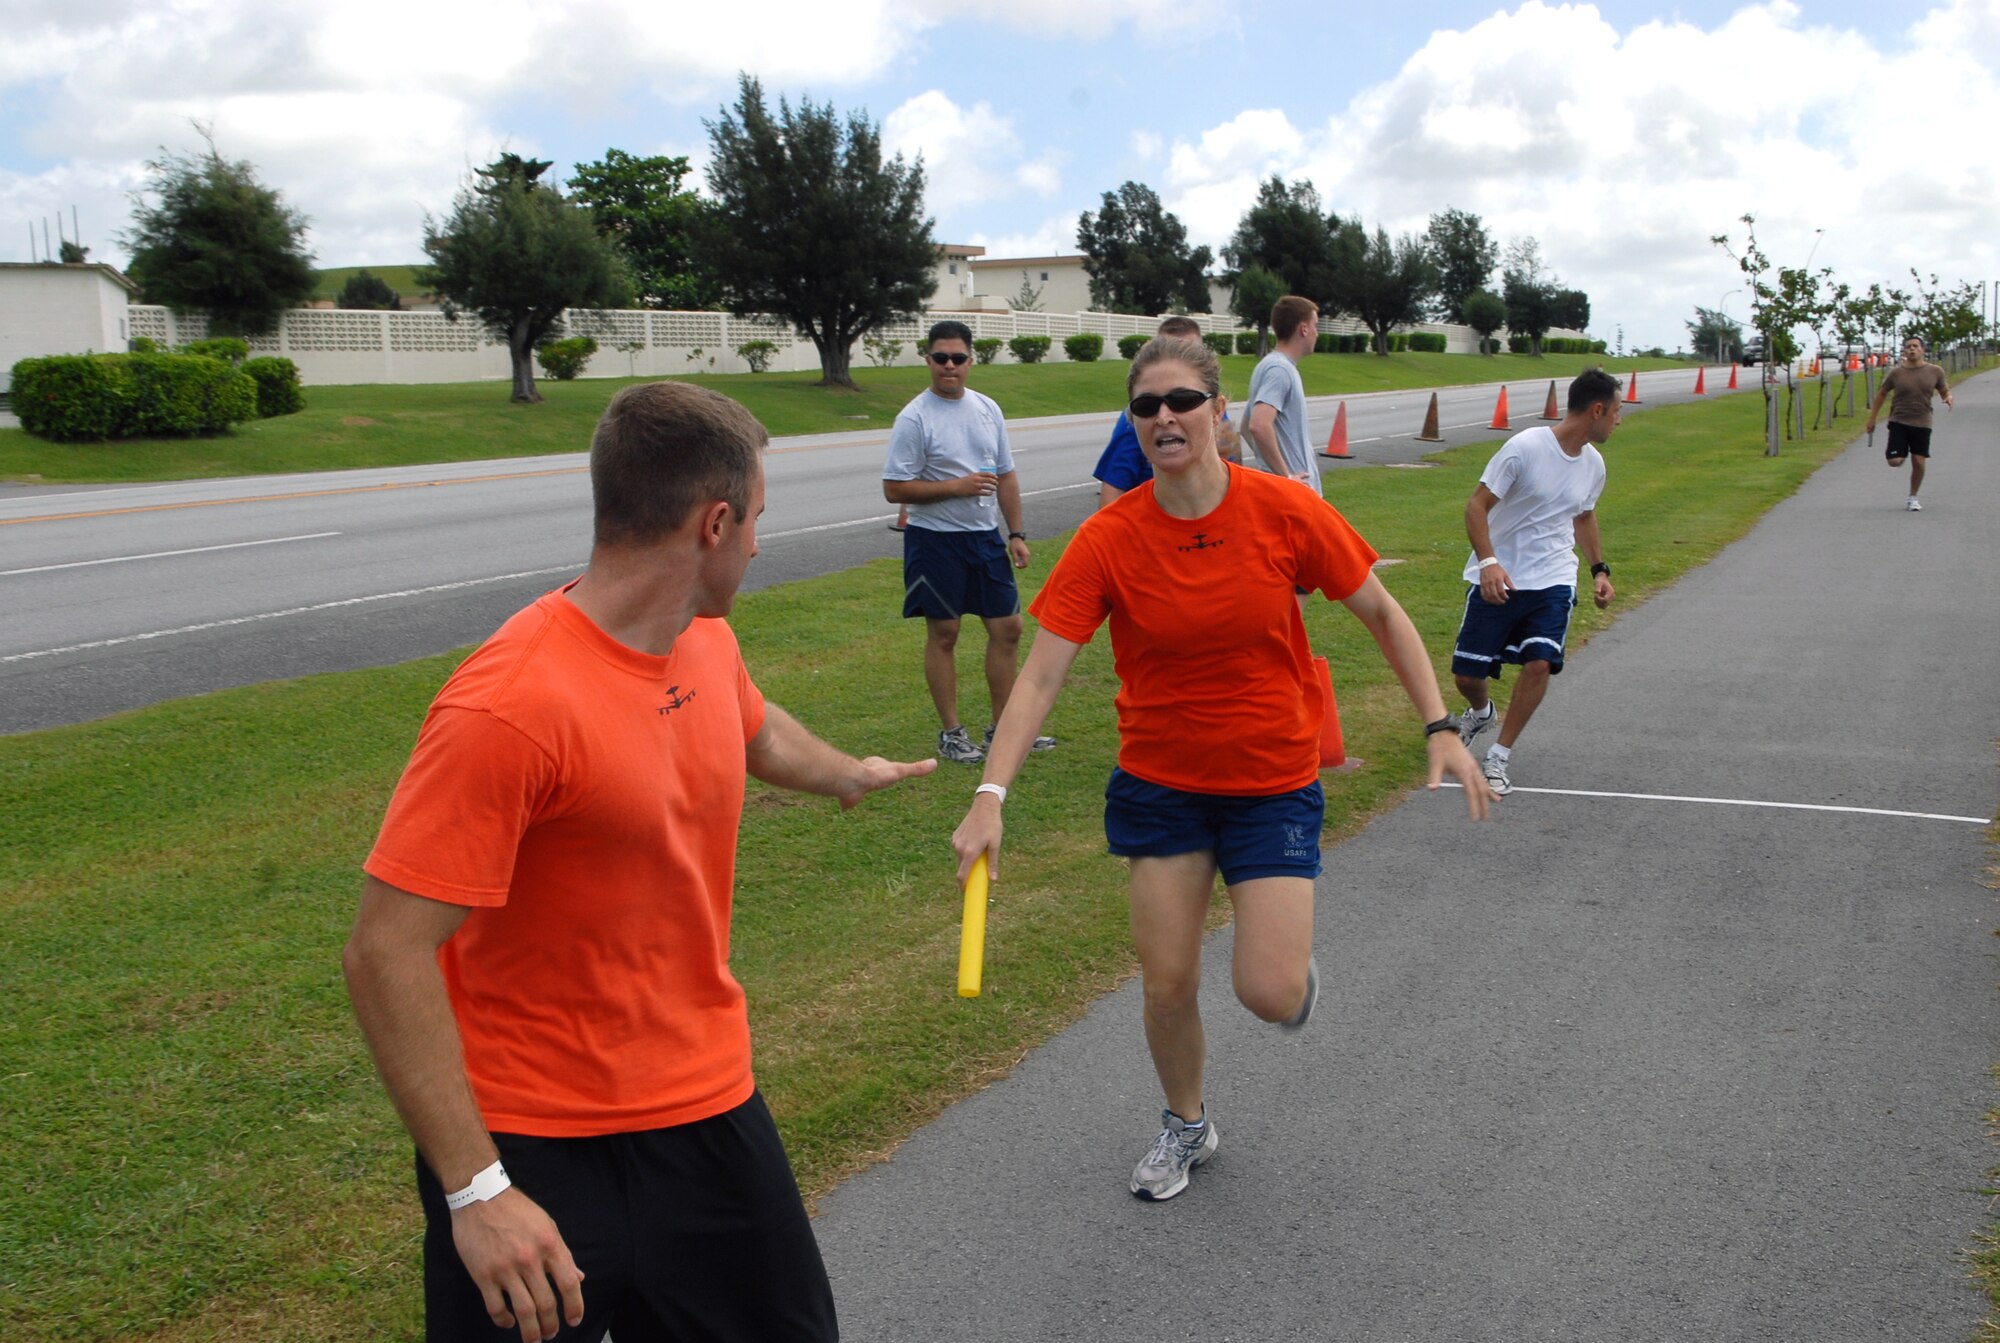 Capt. Vanessa Bartley, 961st Airborne Air Control Squadron, passes the baton to her teammate, Capt. Chris Easterly, as the 961st competed in the relay race during the Joint Services Fitness Challenge July 18. The fitness challenge gathered together 26 teams from various military branches and units to compete against one another in multiple exercise challenges.  Kadena’s own 31st Rescue Squadron walked away with the first and second place trophies and the opportunity to defend their title next year. (U.S. Air Force photo/Staff Sgt. Christopher Marasky) 